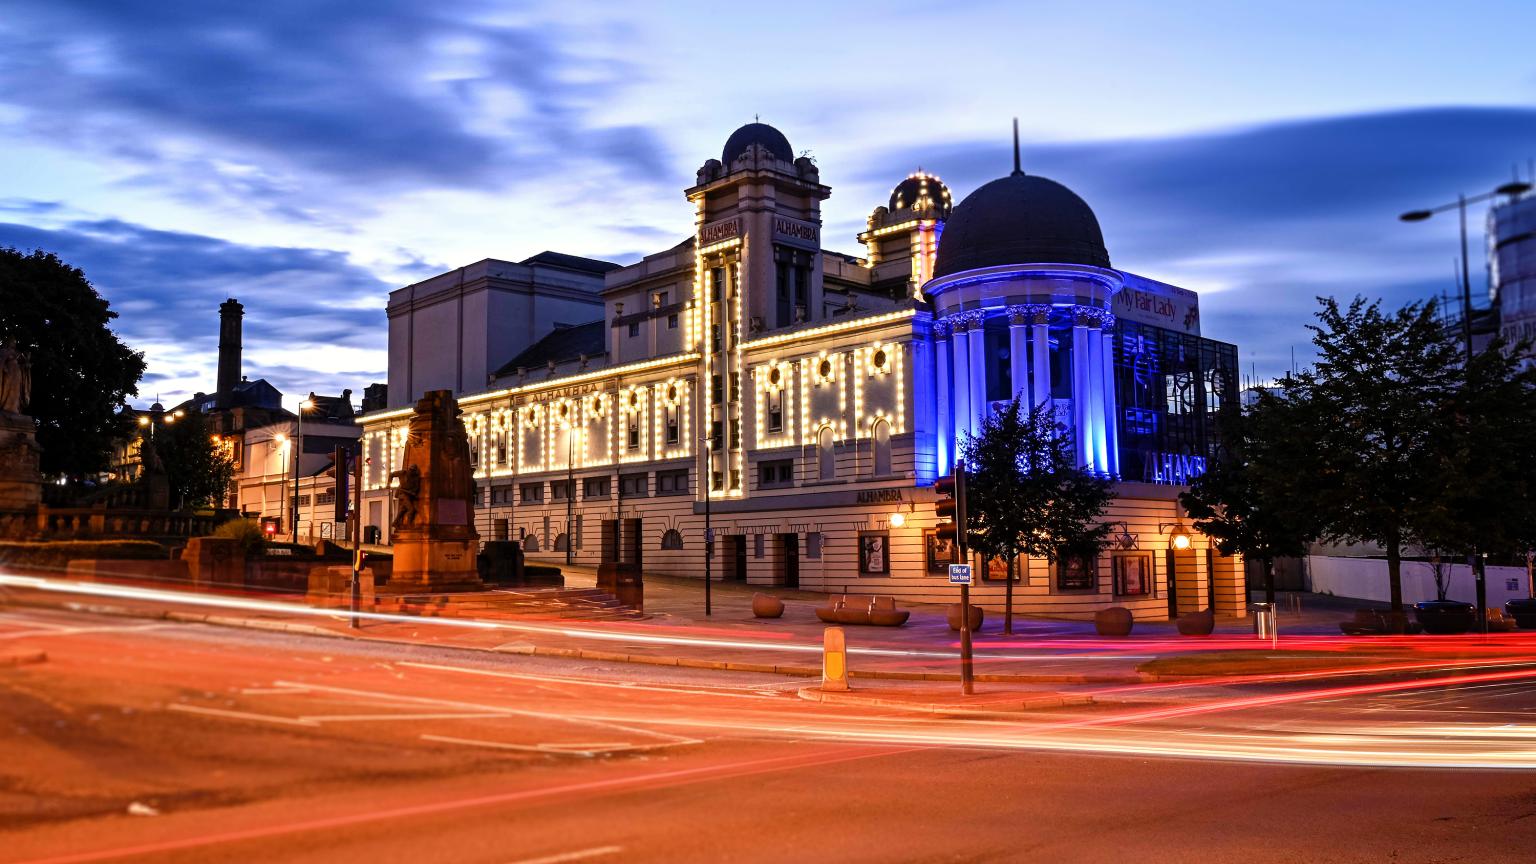 Alhambra Theatre - The Best Live Music Venues in Bradford: An Evening at Napoleons Casino - Live Music Venue Bradford - Napoleons Casinos & Restaurants